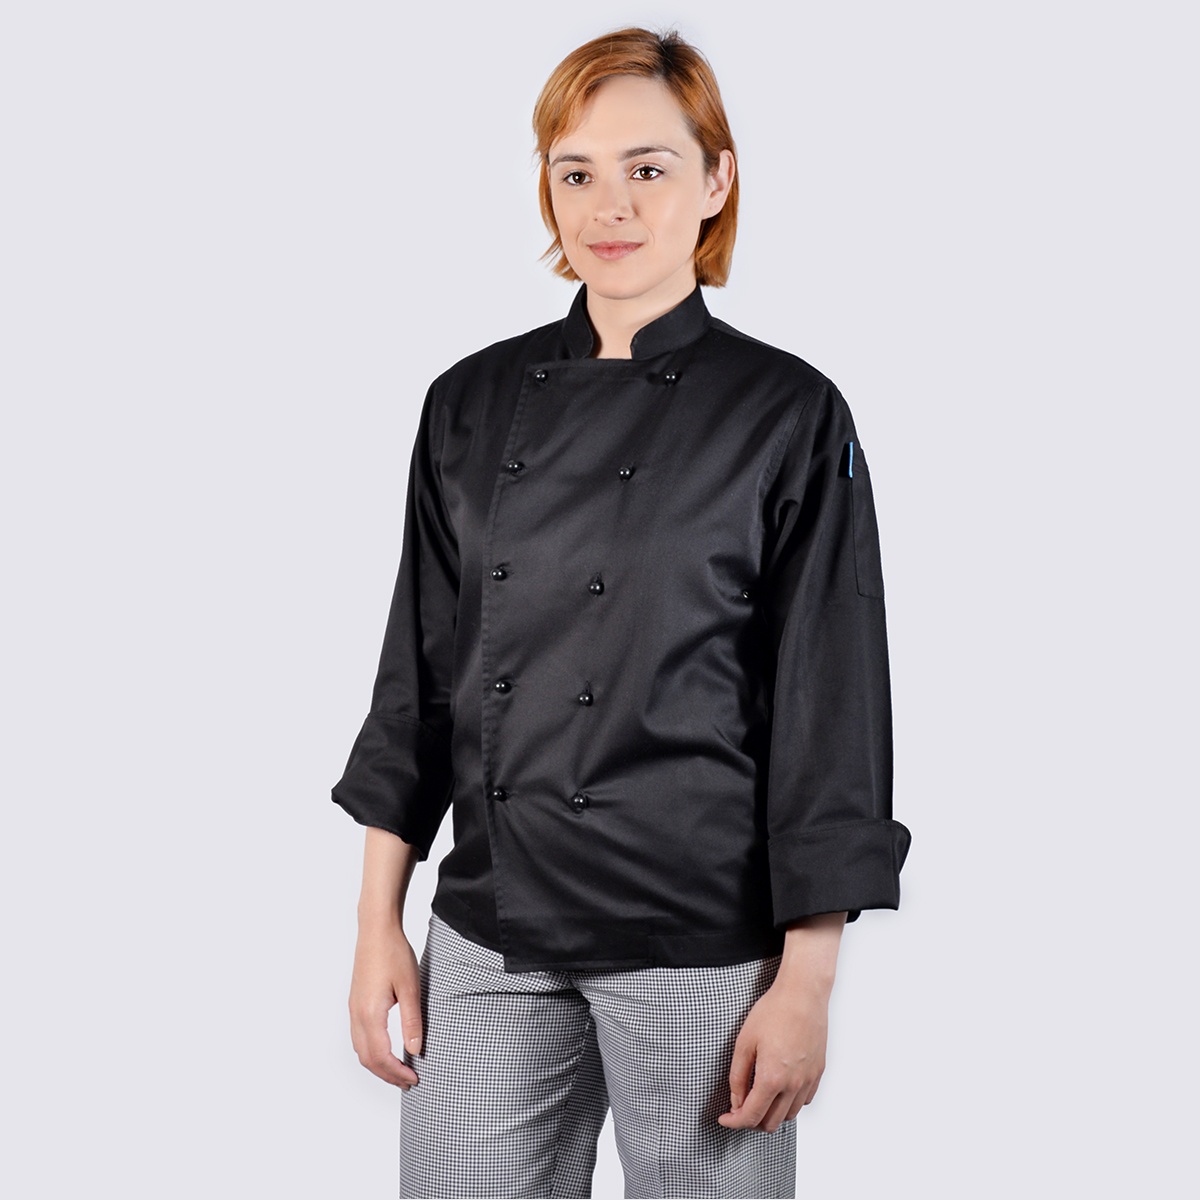 chef jackets black long sleeve with black buttons